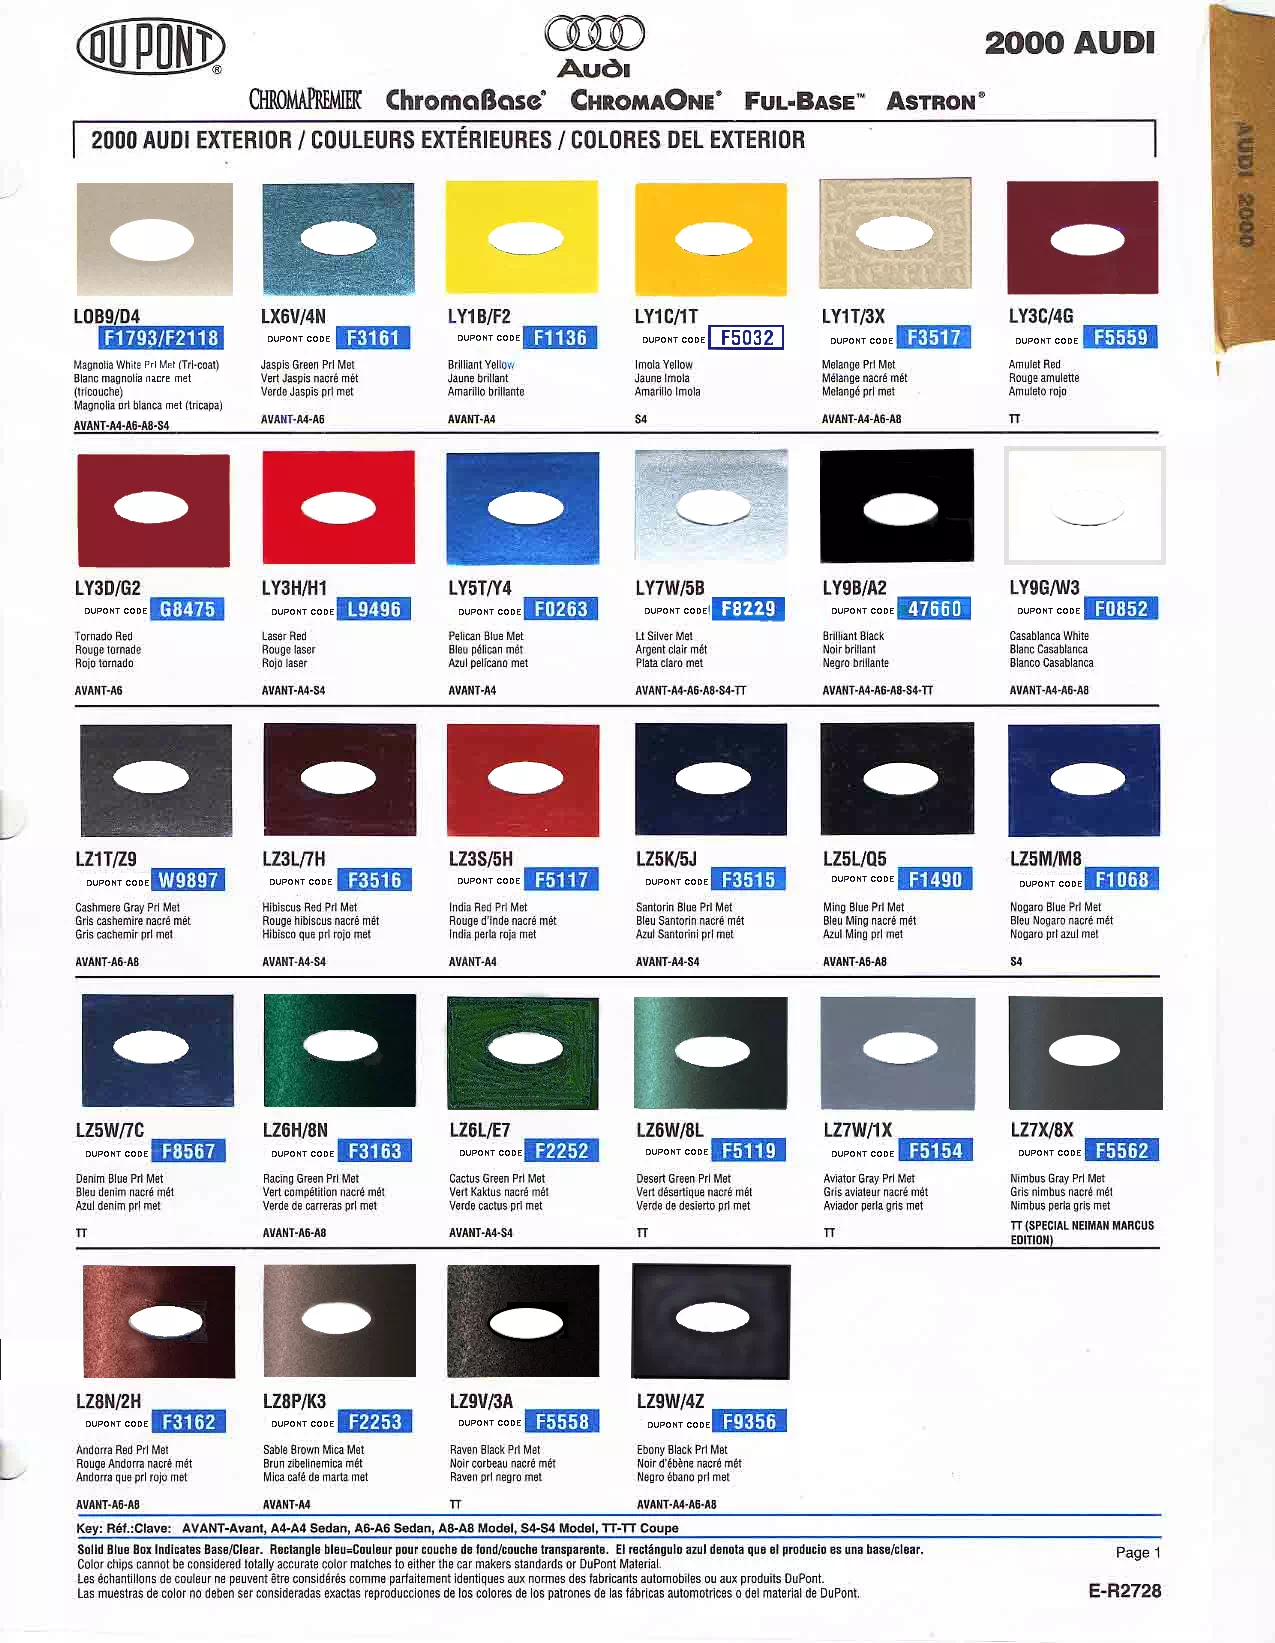 Audi exterior paint codes and their colors used on their vehicles